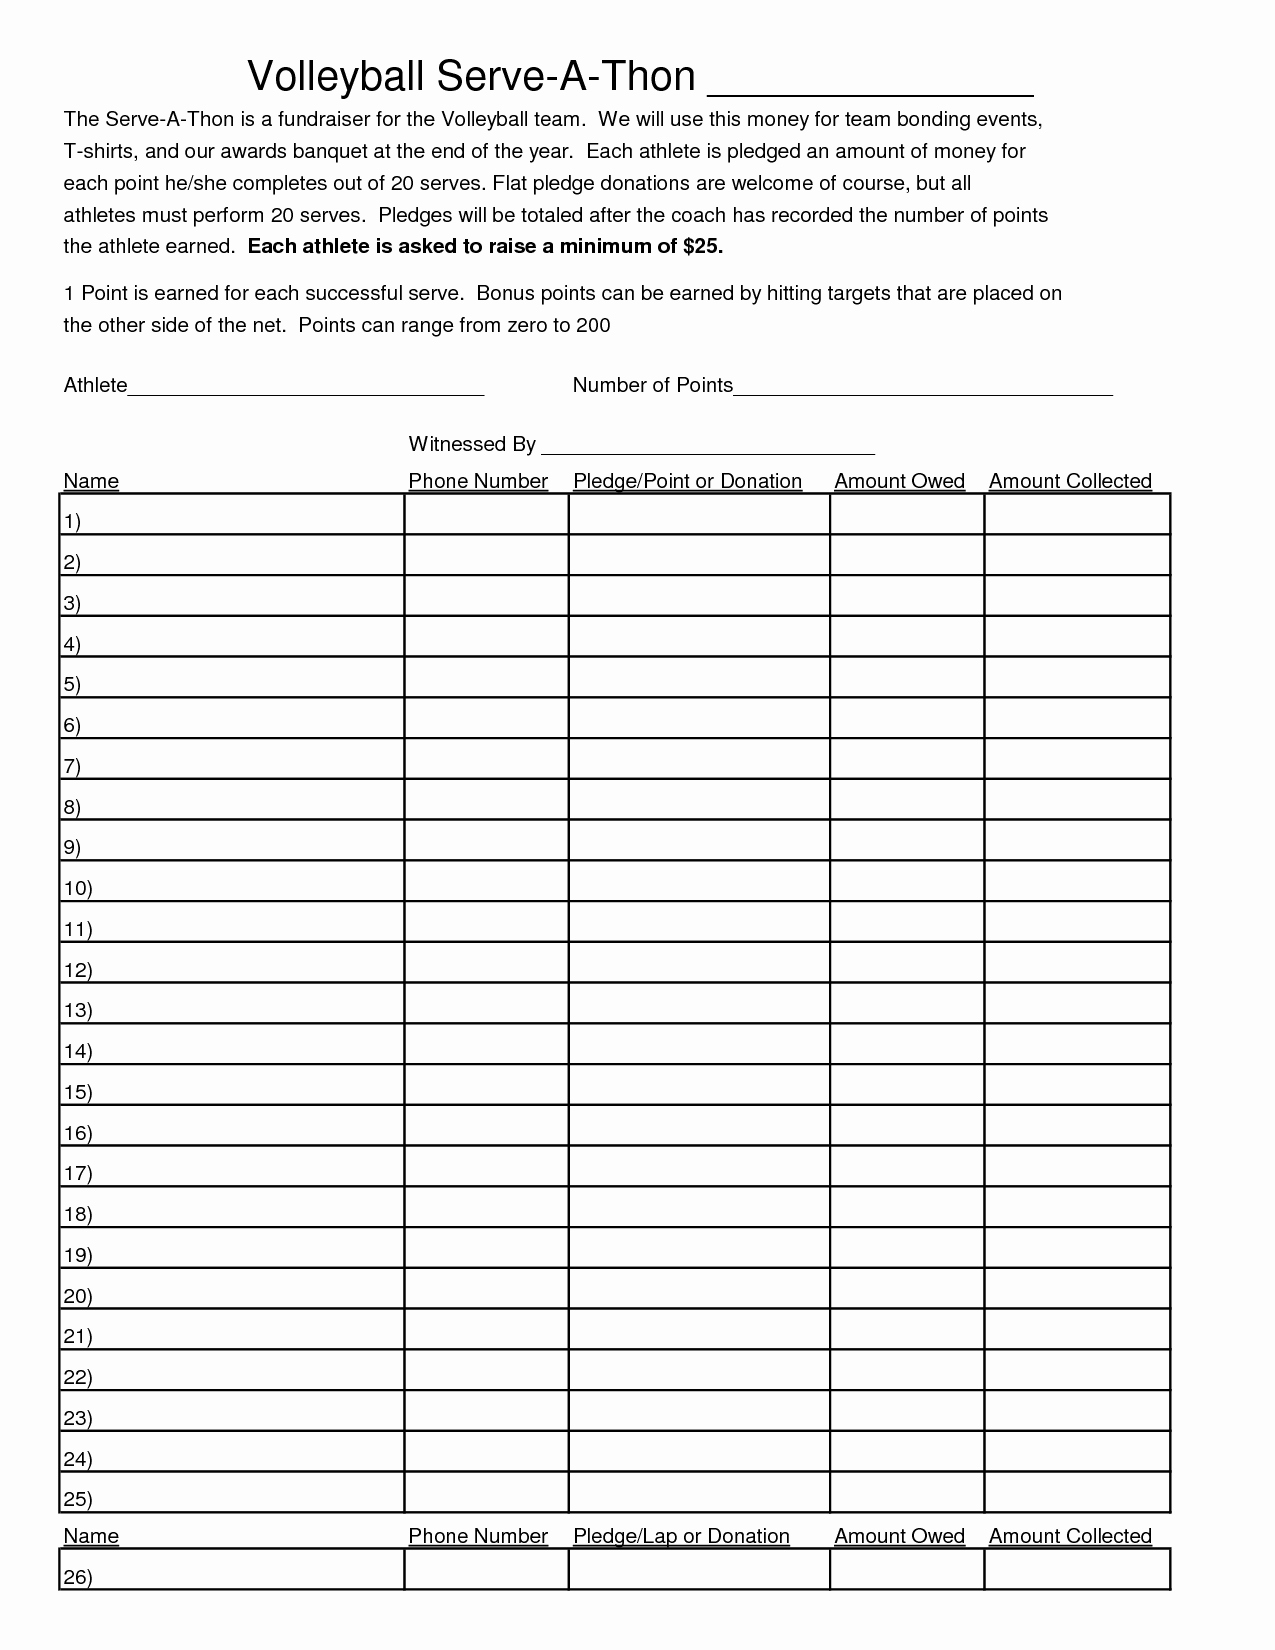 Fundraiser form Template Free Awesome format for Pledge form for Fund Raising Choice Image